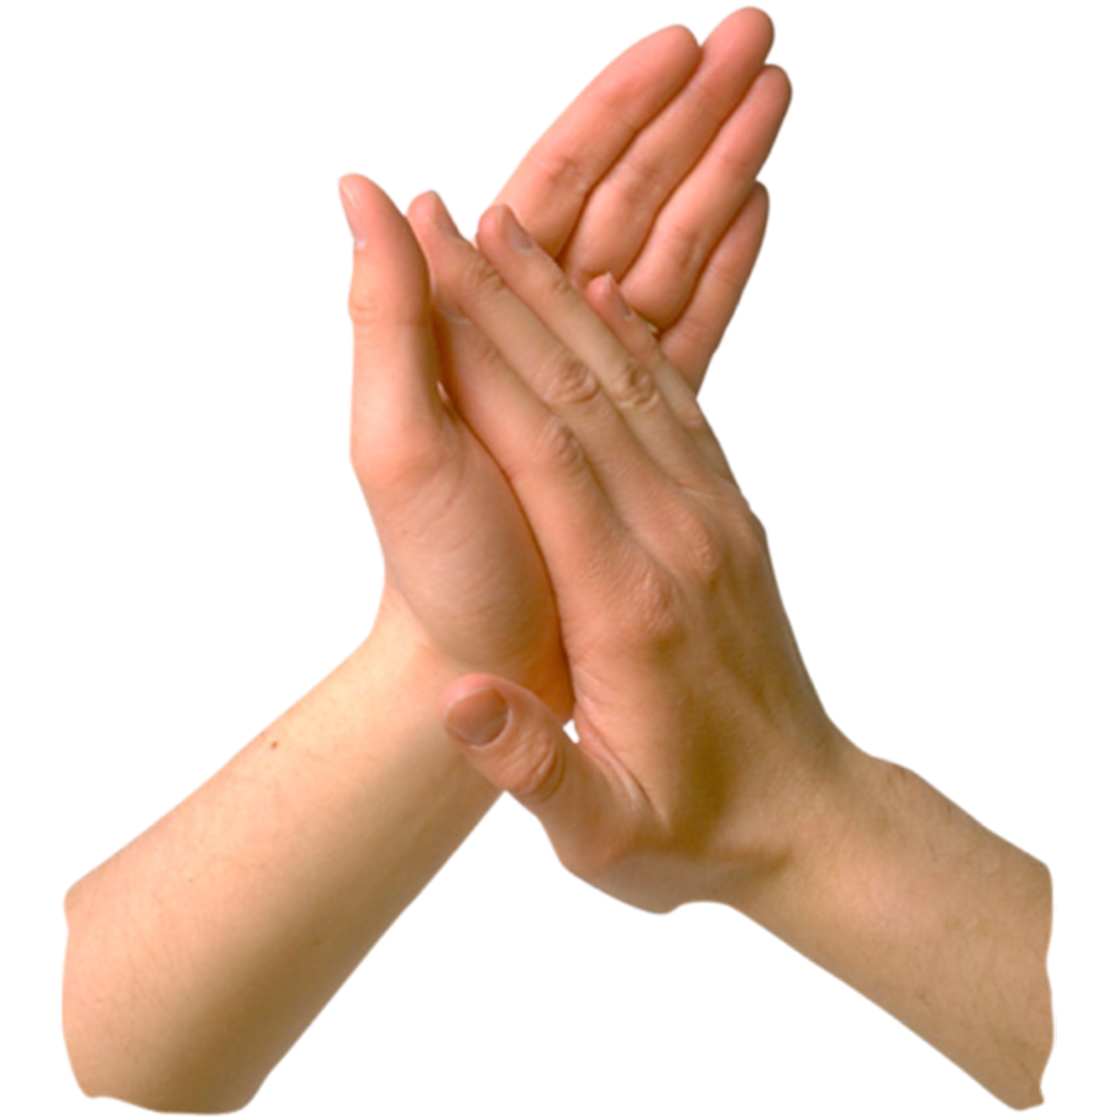 Clapping Hands Transparent Image